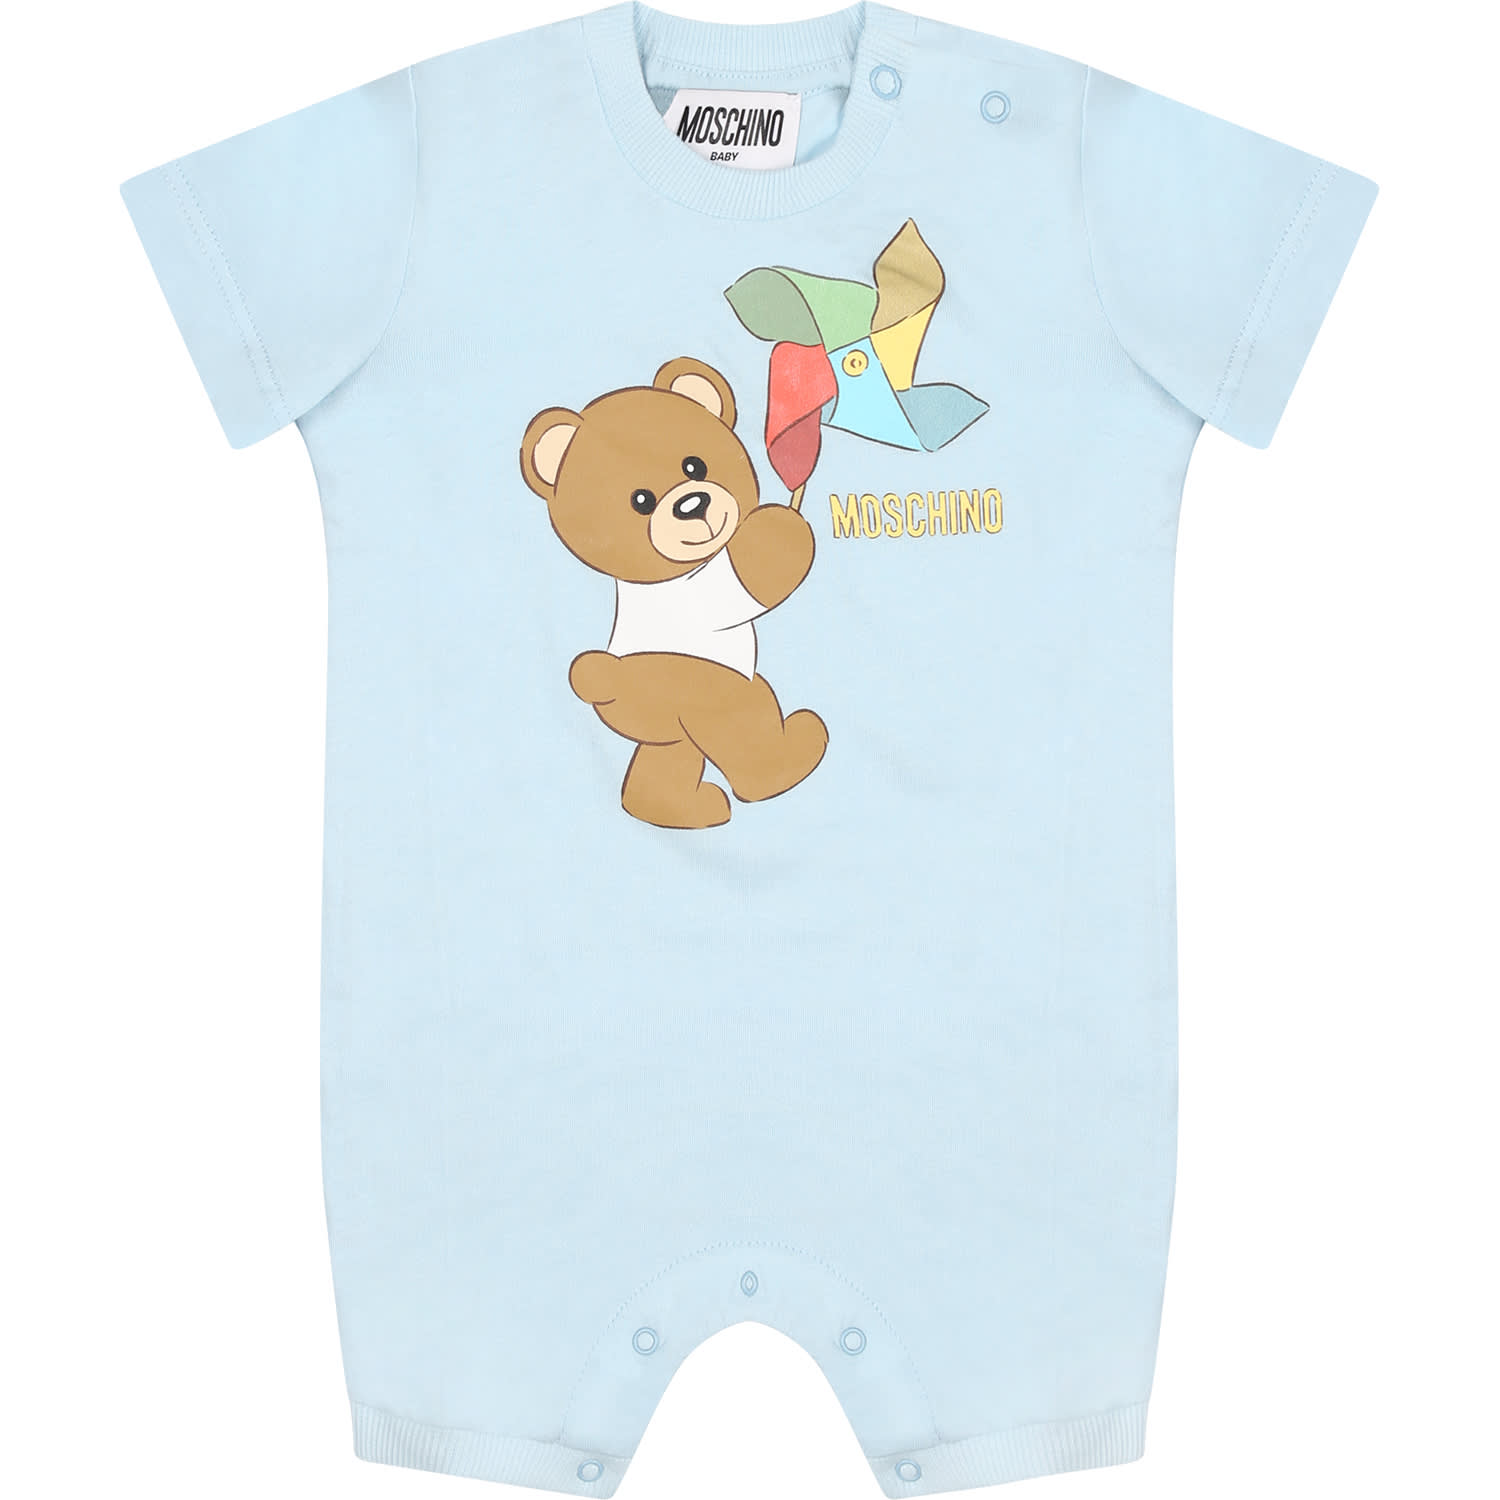 Moschino Light Blue Bodysuit For Baby Boy With Teddy Bear And Pinwheel